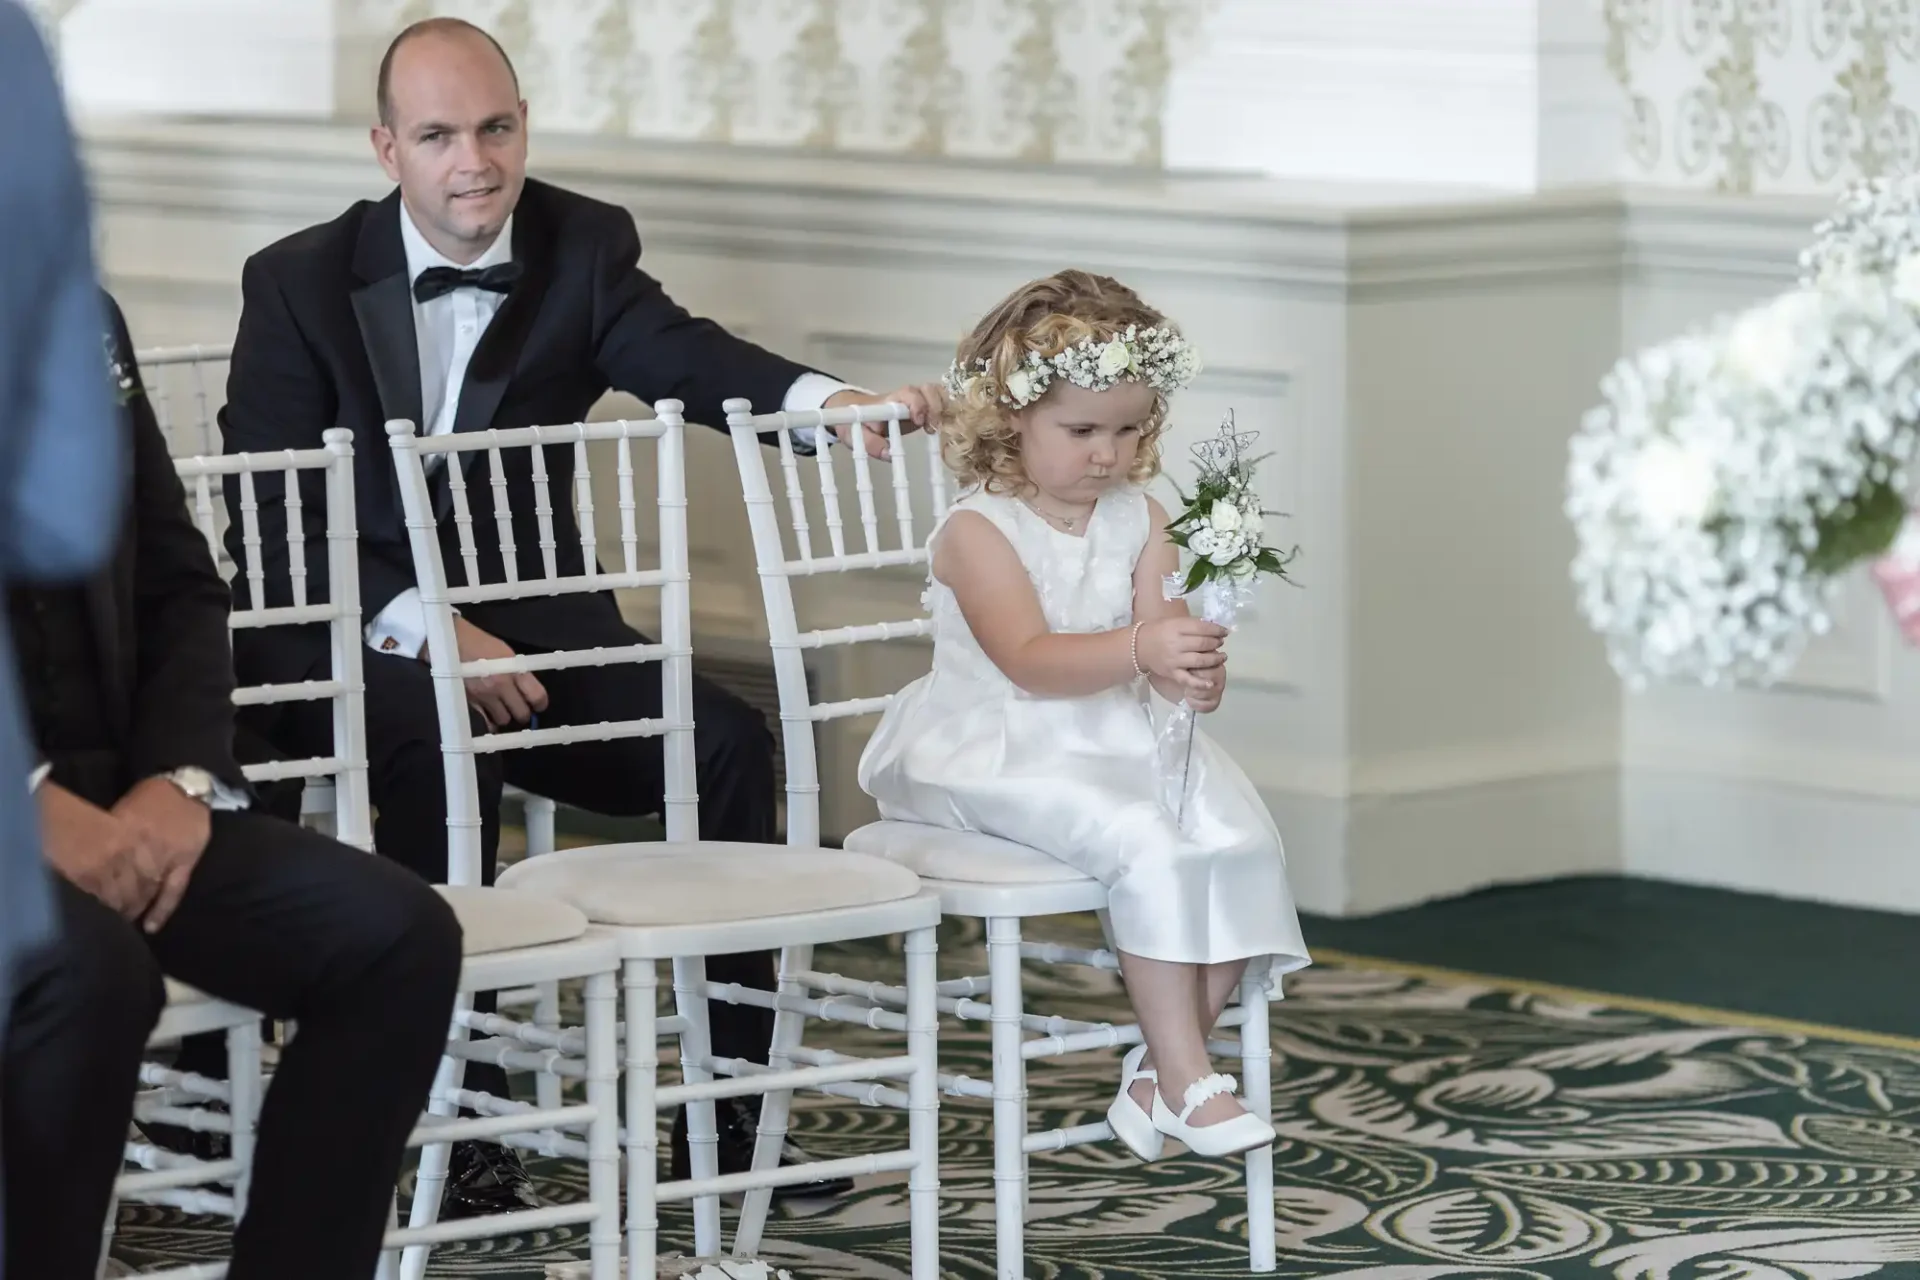 A man in a tuxedo sits beside a young girl in a white dress and floral headband, who is holding a small bouquet, both seated at a formal event.